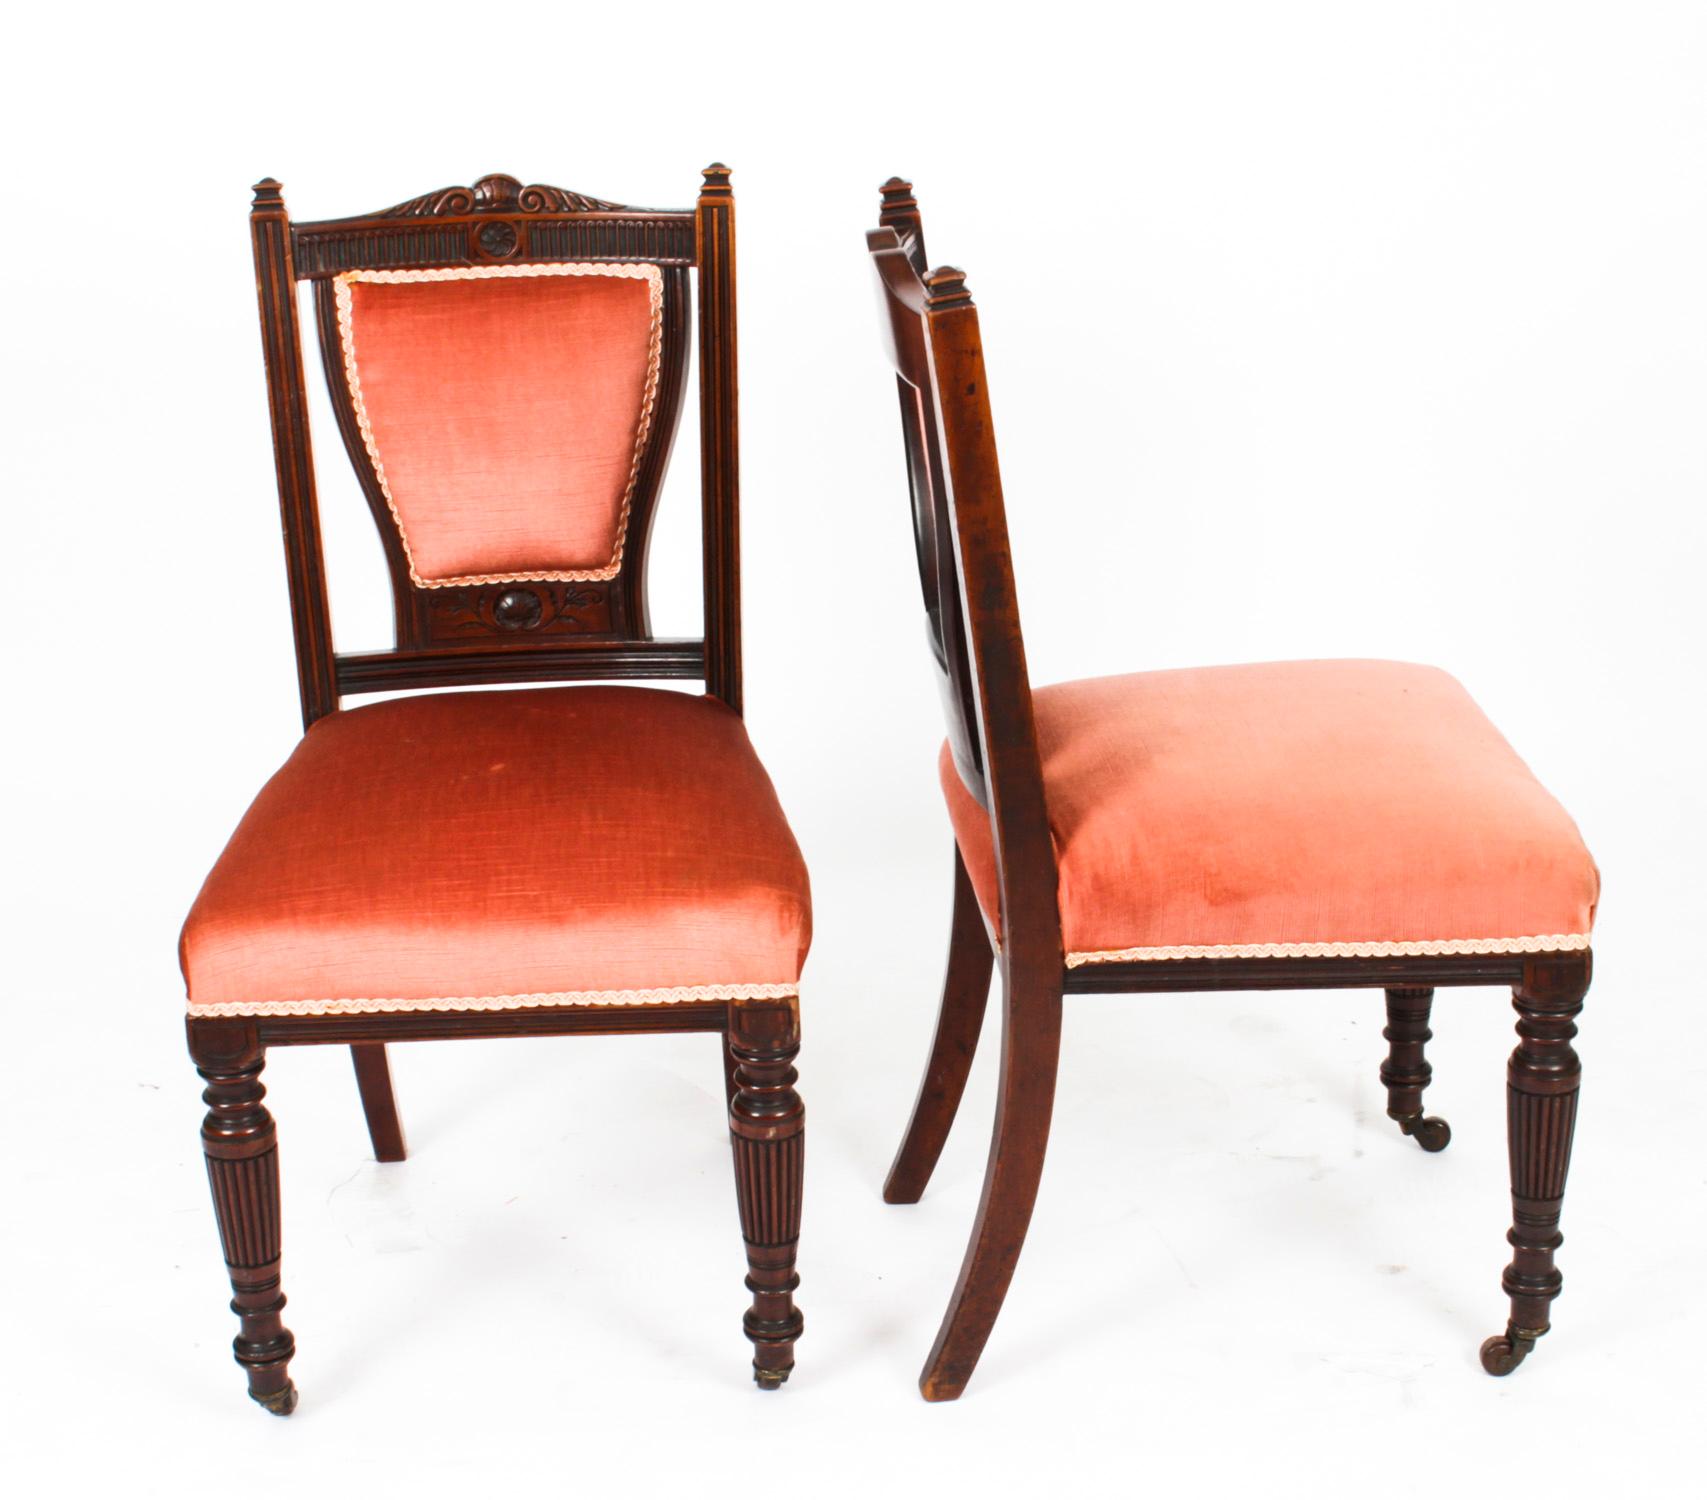 This is a beautiful bespoke antique pair of late Victorian side chairs, circa 1890 in date.

These chairs have been masterfully crafted in beautiful solid mahogany throughout and the finish and attention to detail on display are truly